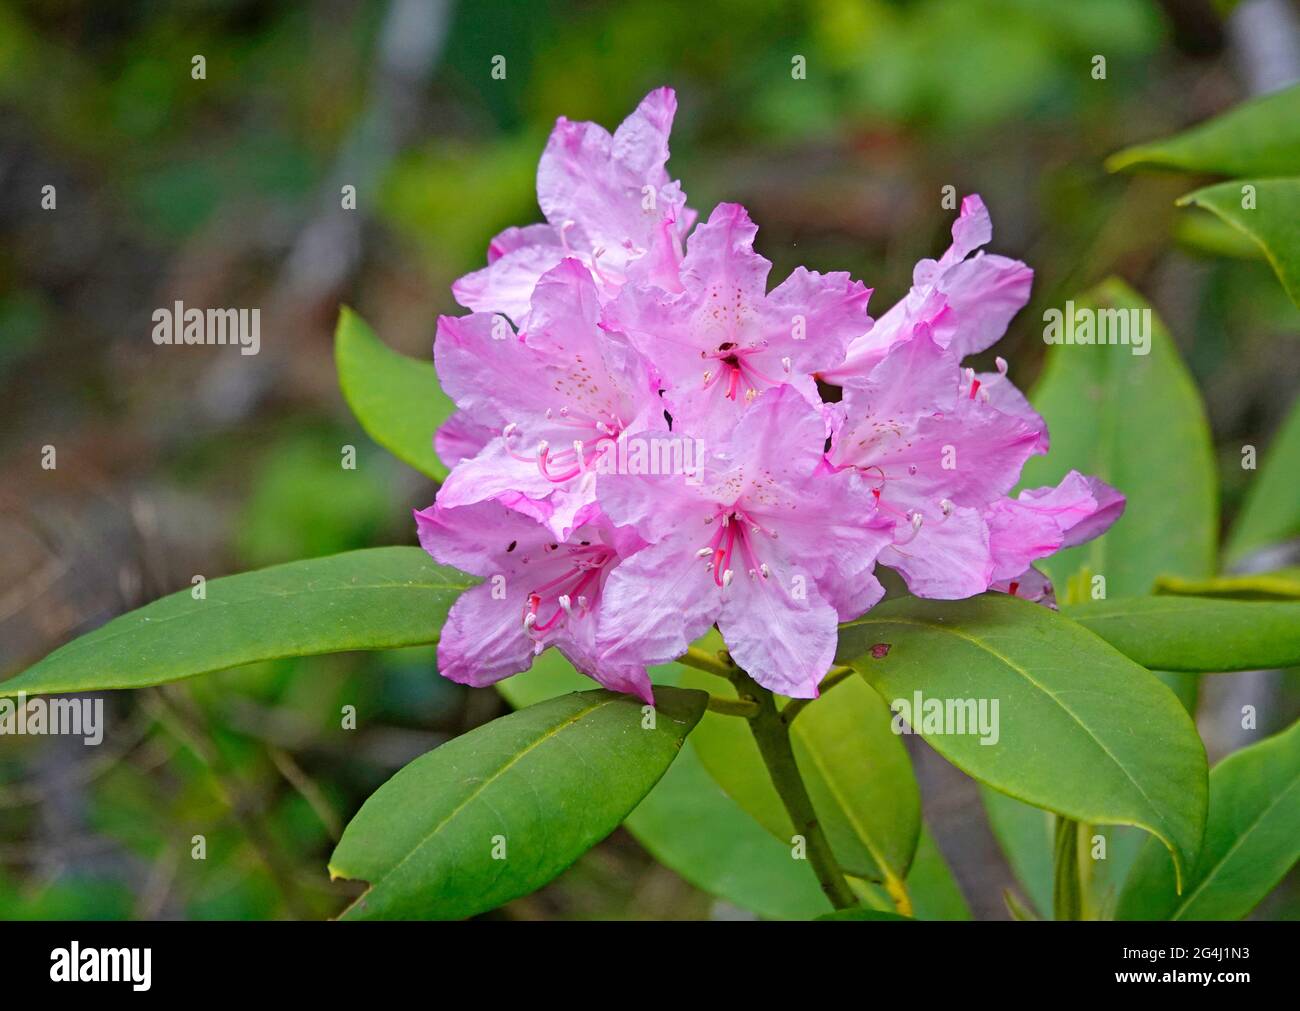 Portrait of the bloom of a pink, Pacific rhododendron, Rhododendron macrophyllum, growing in the Cascade Mountains of central Oregon. Stock Photo